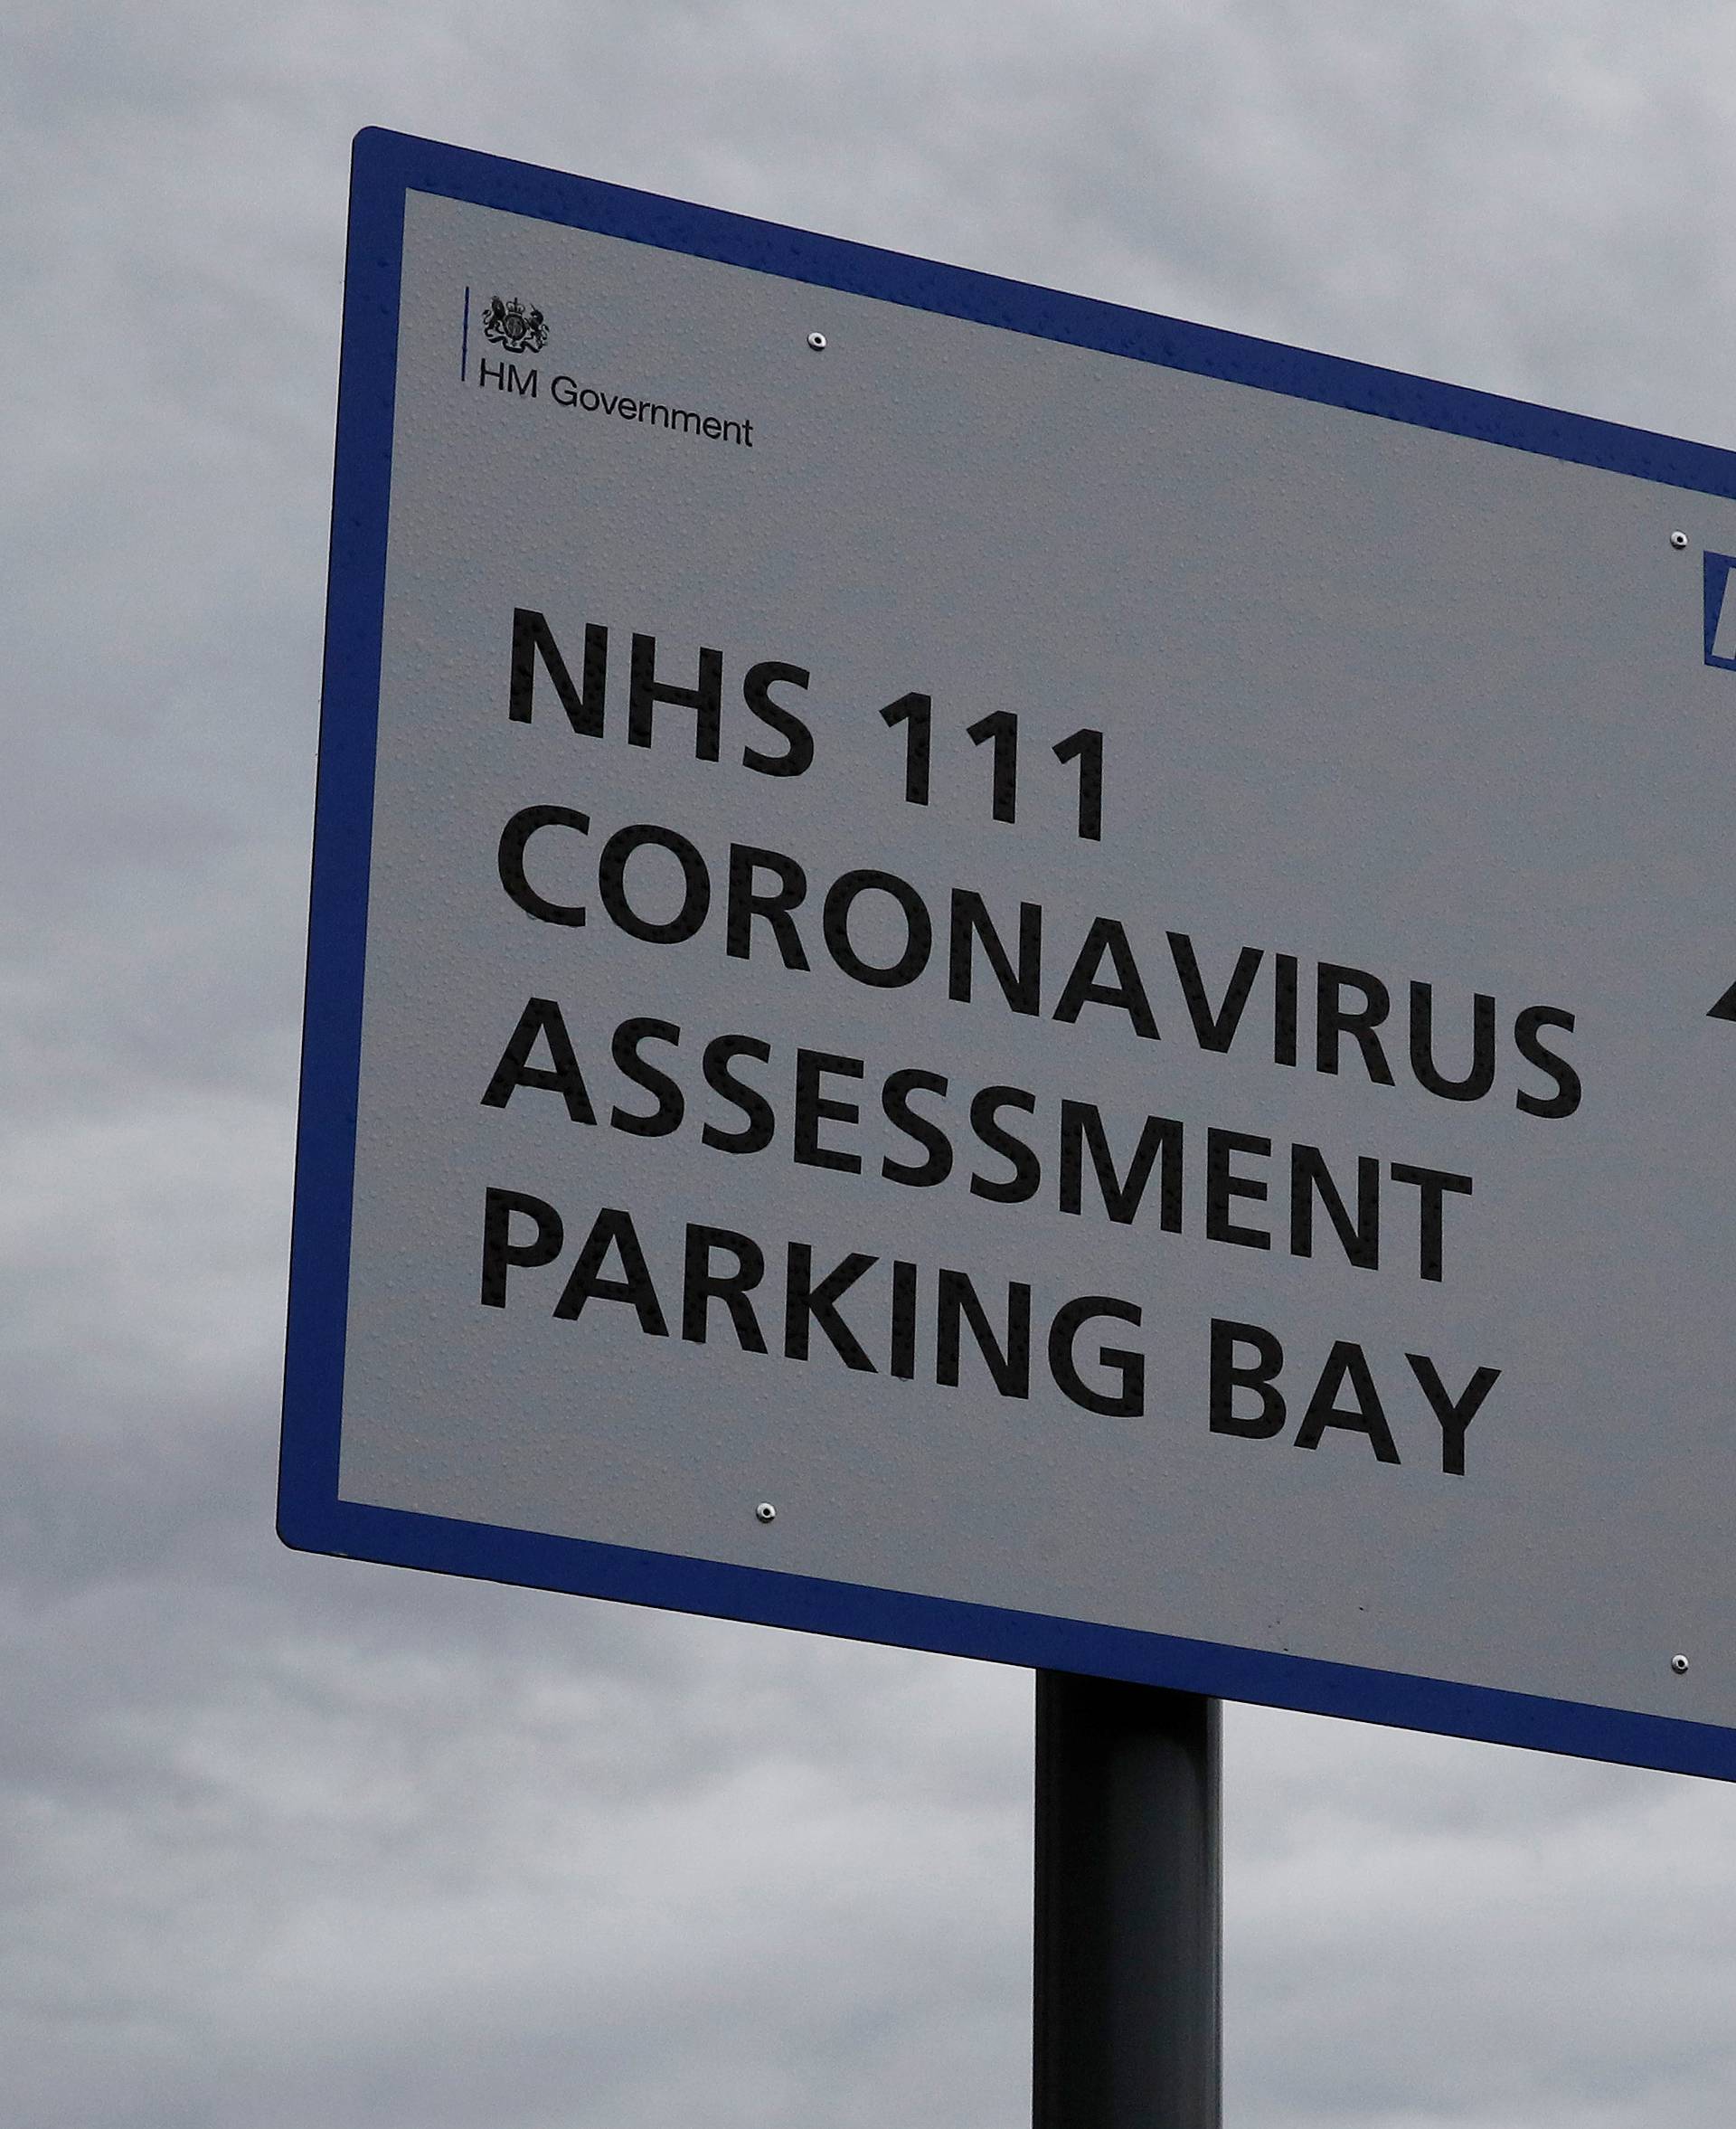 Signage directing patients towards a Coronavirus assessment bay is seen outside Whiston Hospital in Liverpool